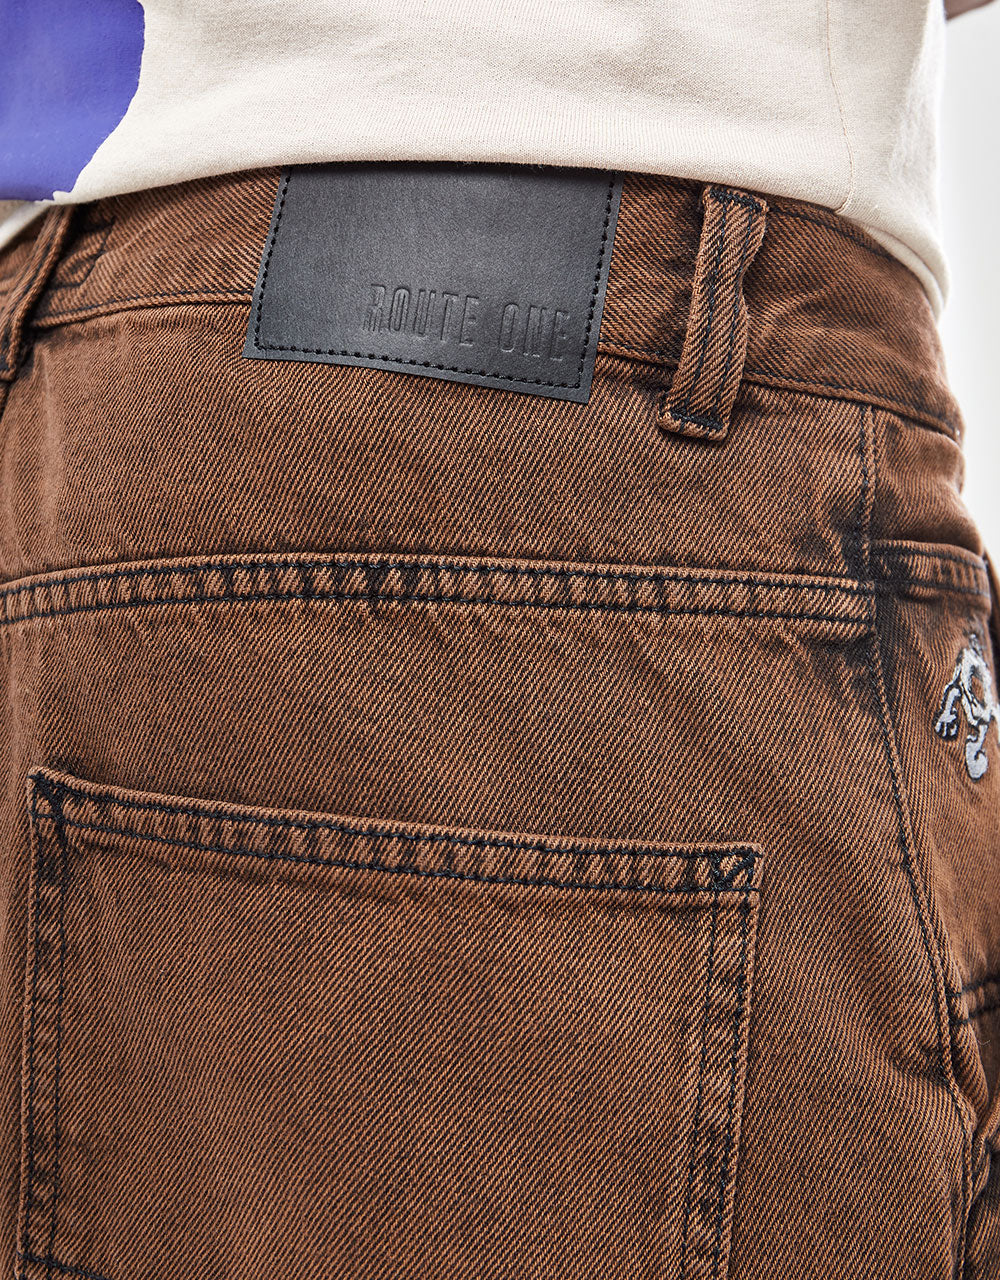 Route One Super Baggy Denim Shorts - Gingerbread